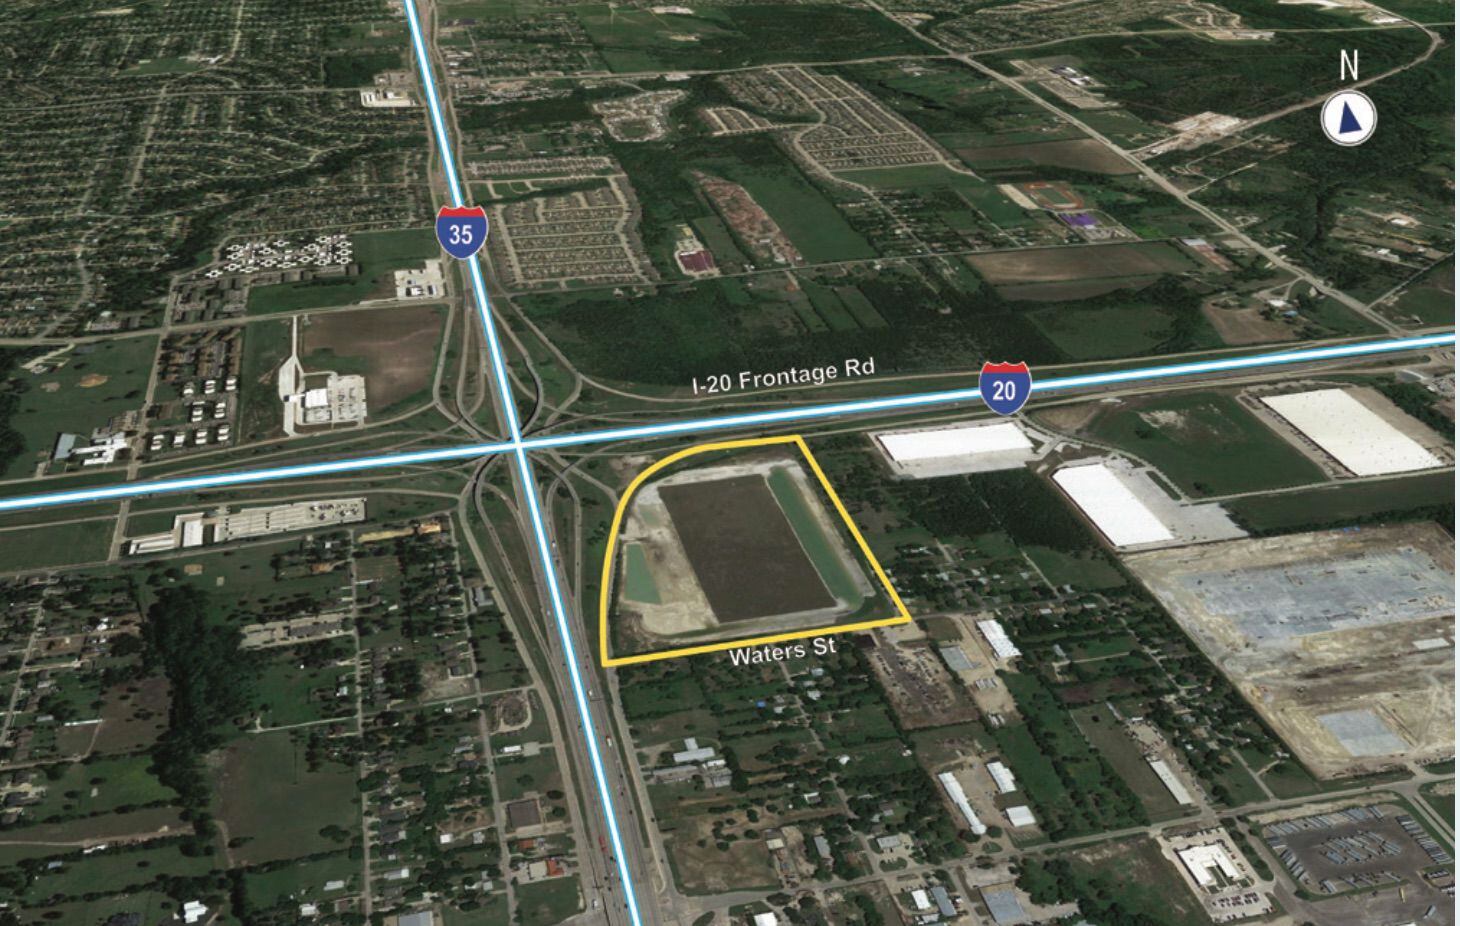 The development is planned at the southeast corner of Interstates 20 and 35W.